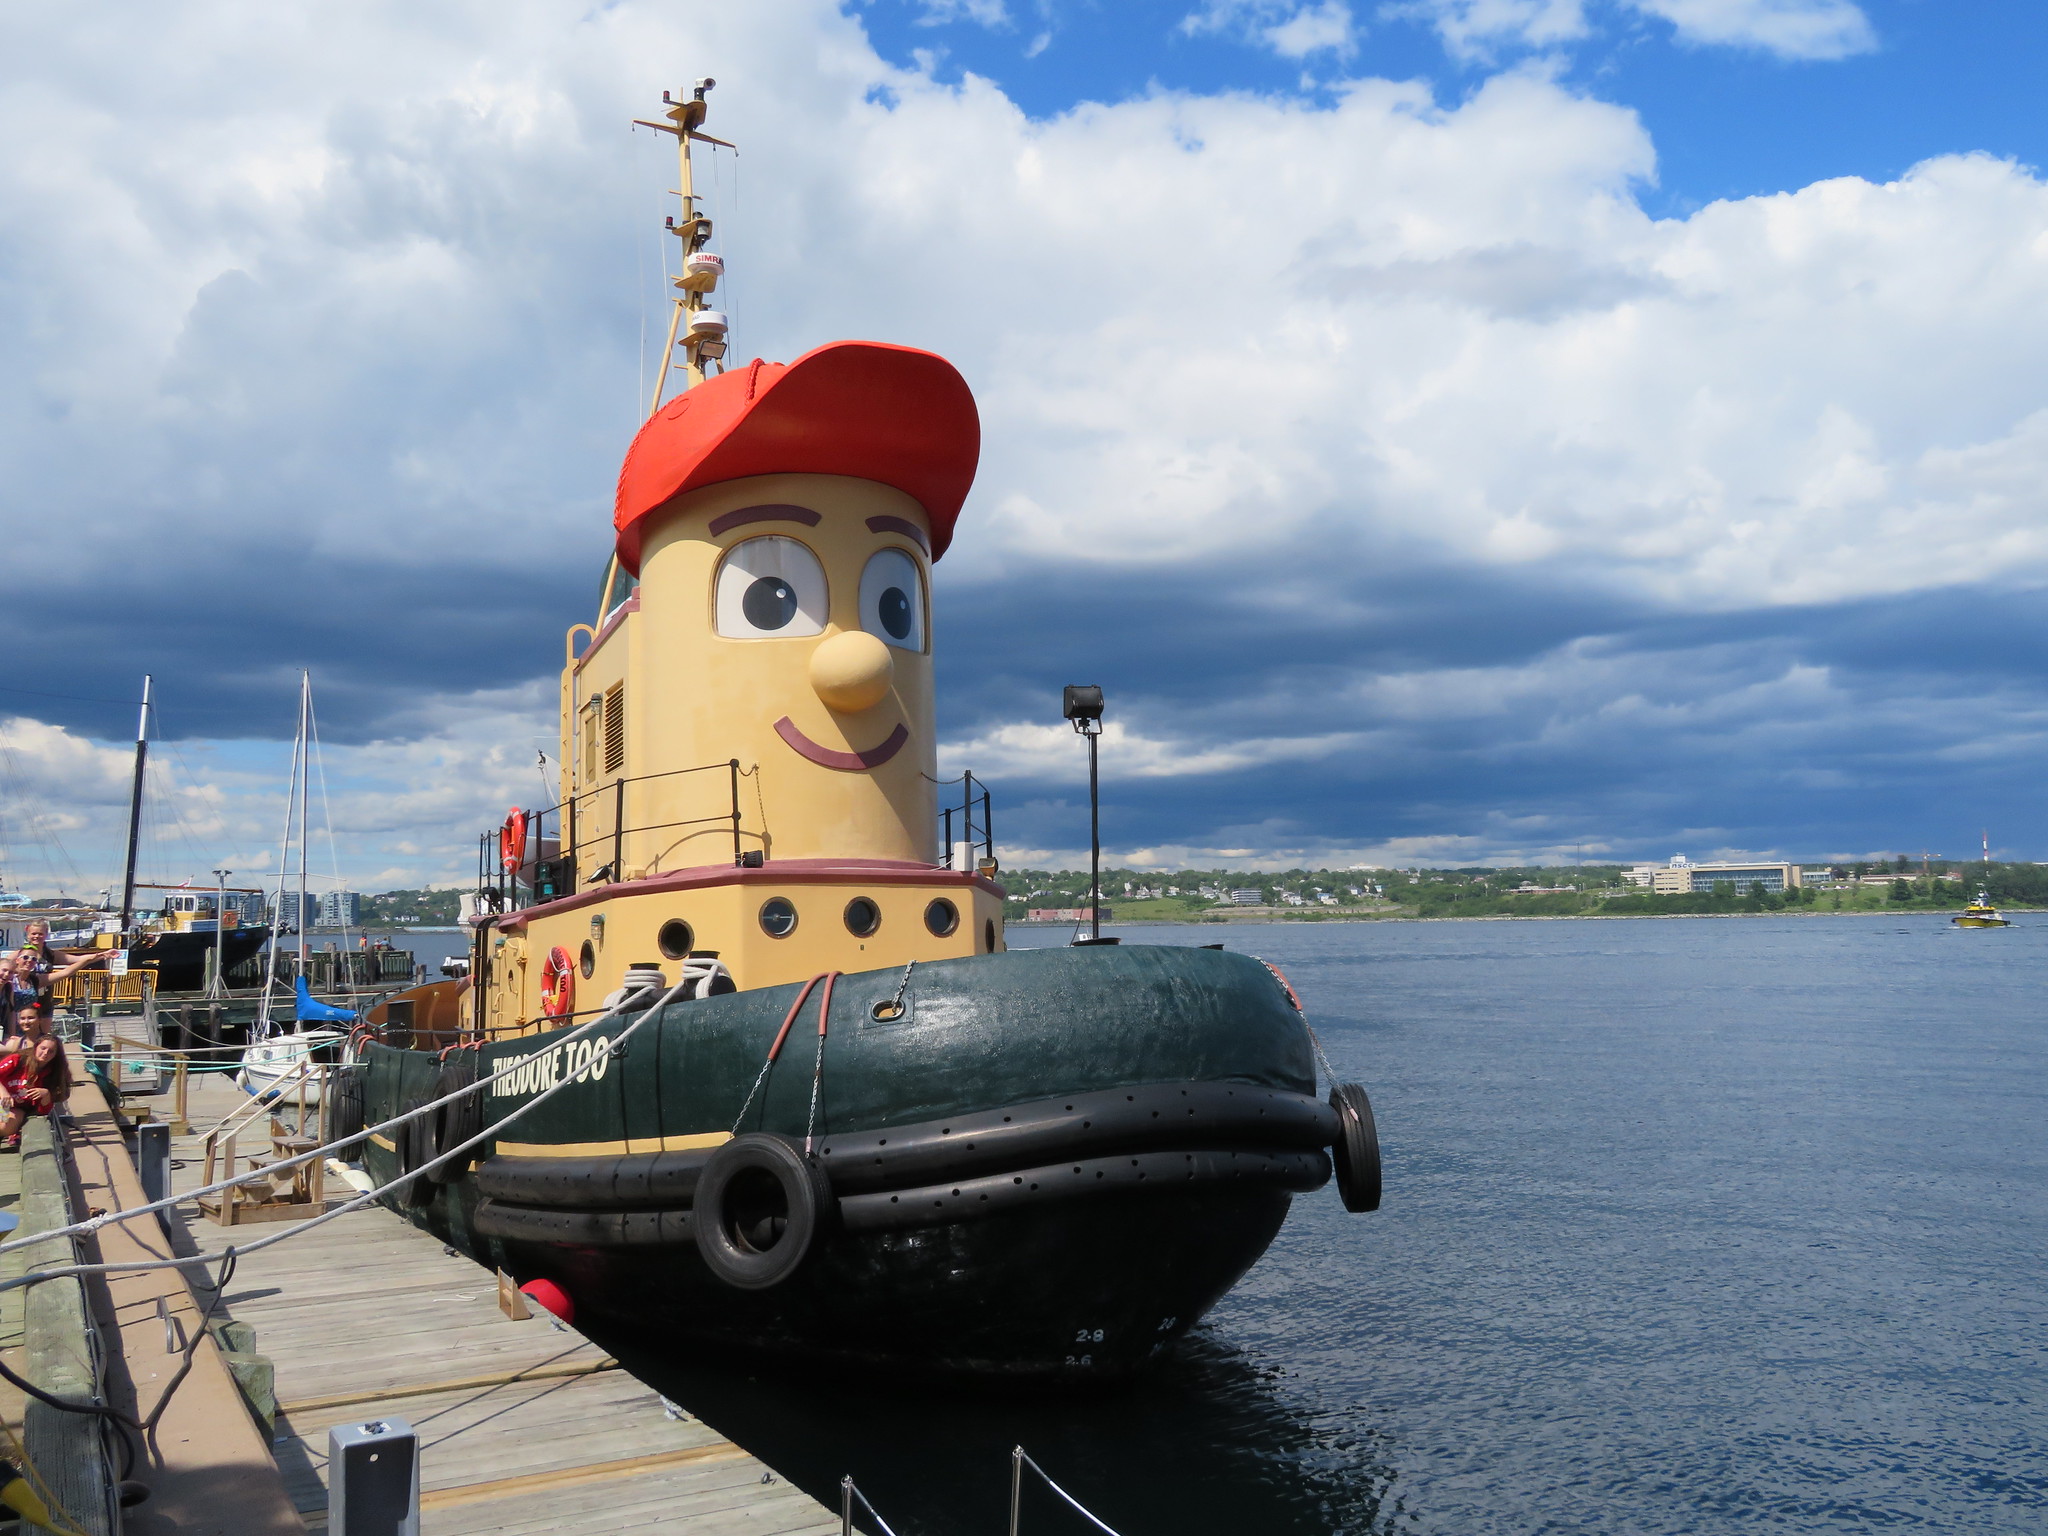 picture of a boat at a dock with a cartoon man's face and a red cap